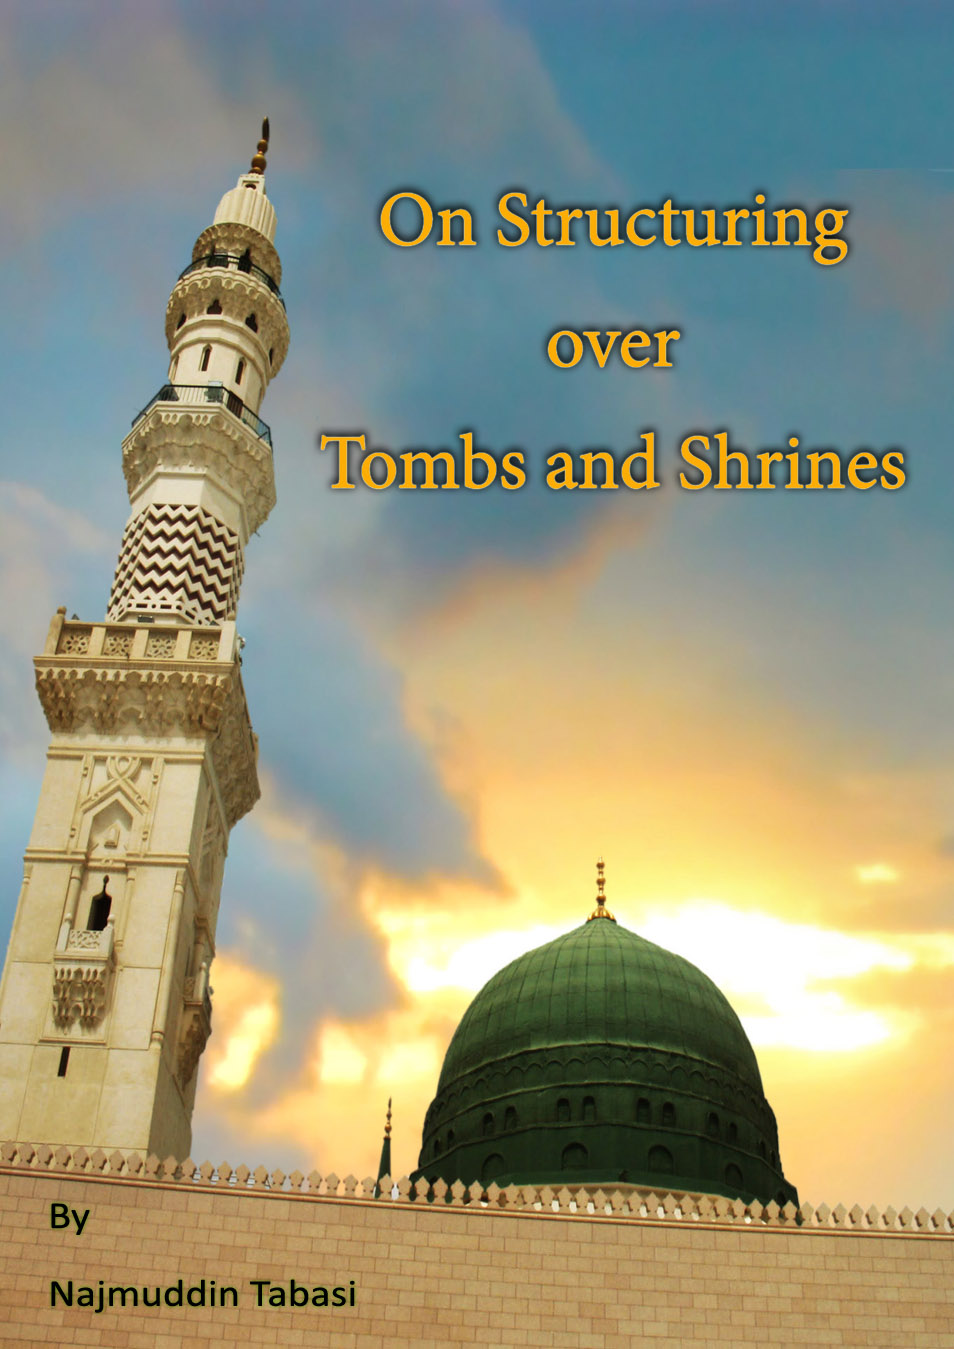 On Structuring over Tombs